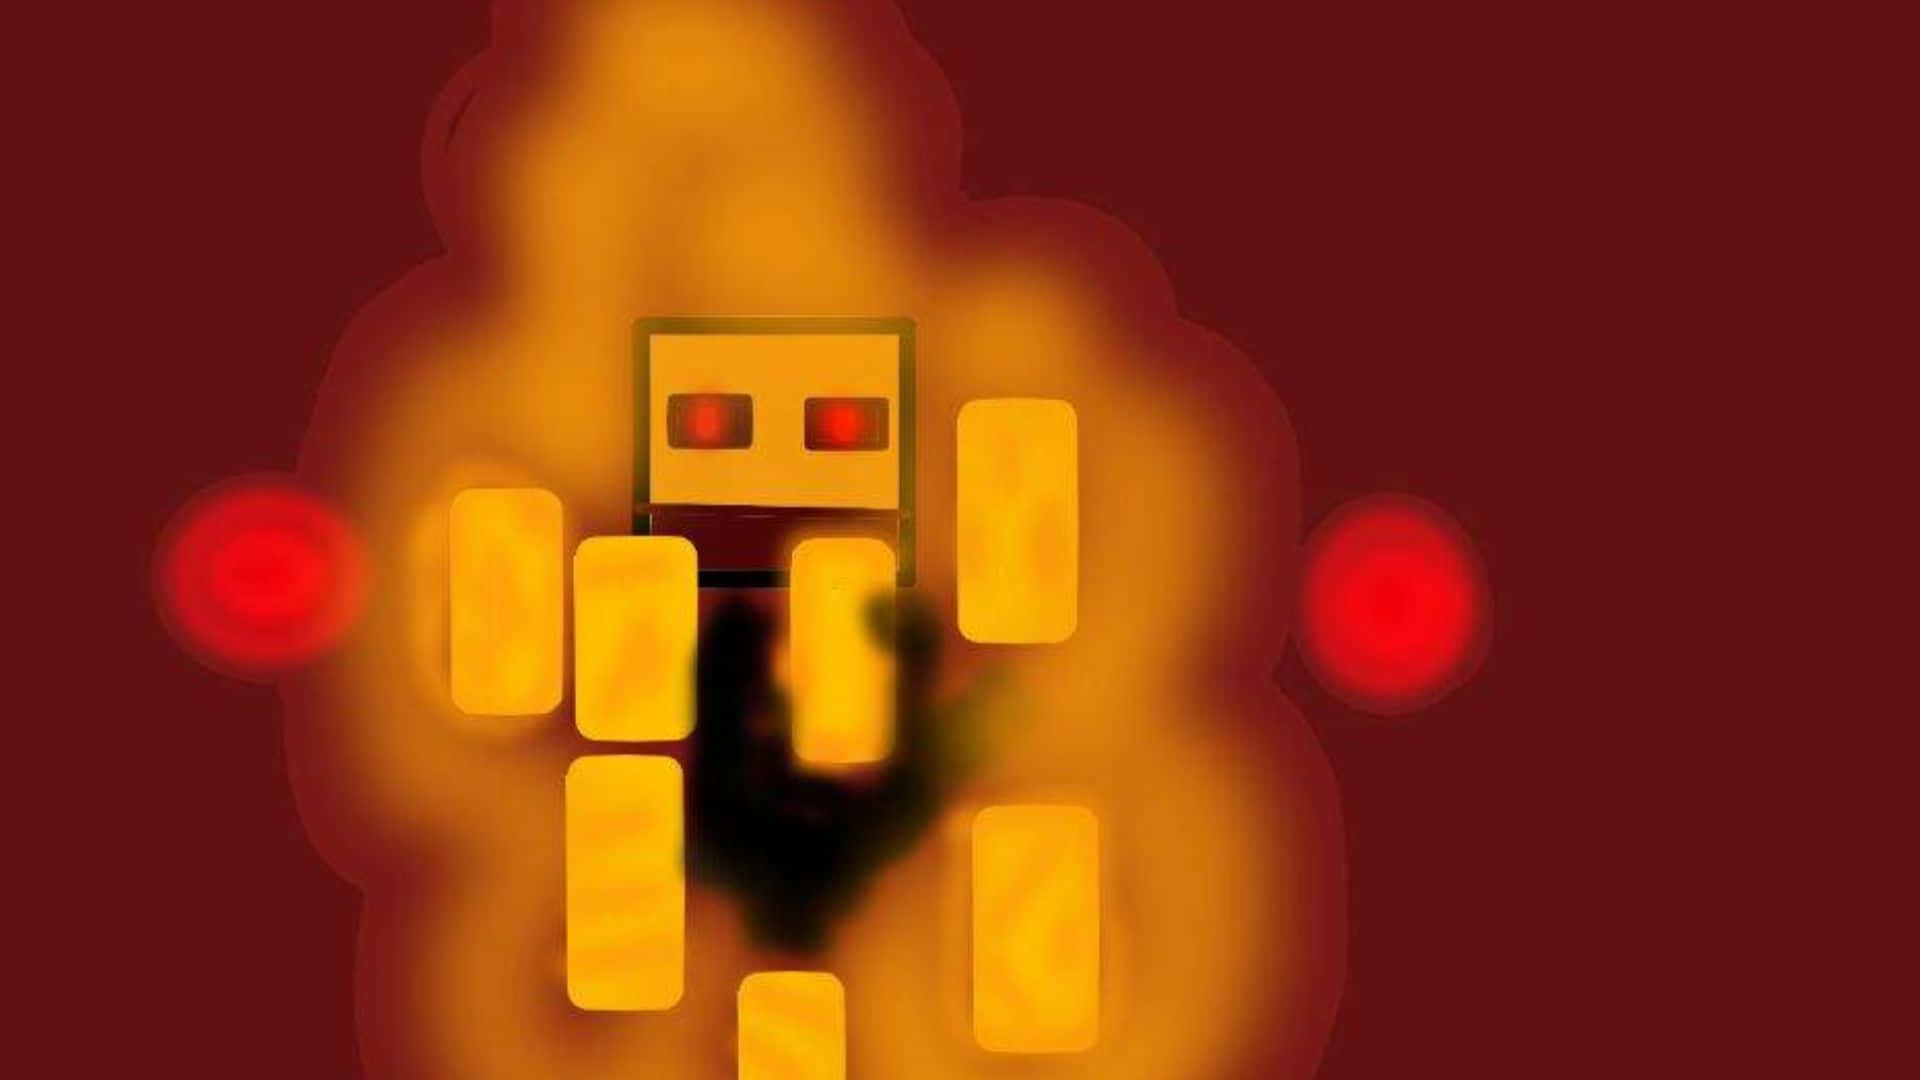 Blazing Battle in the Nether - A fierce Minecraft Blaze faces off against the player in the fiery Nether realm. Wallpaper